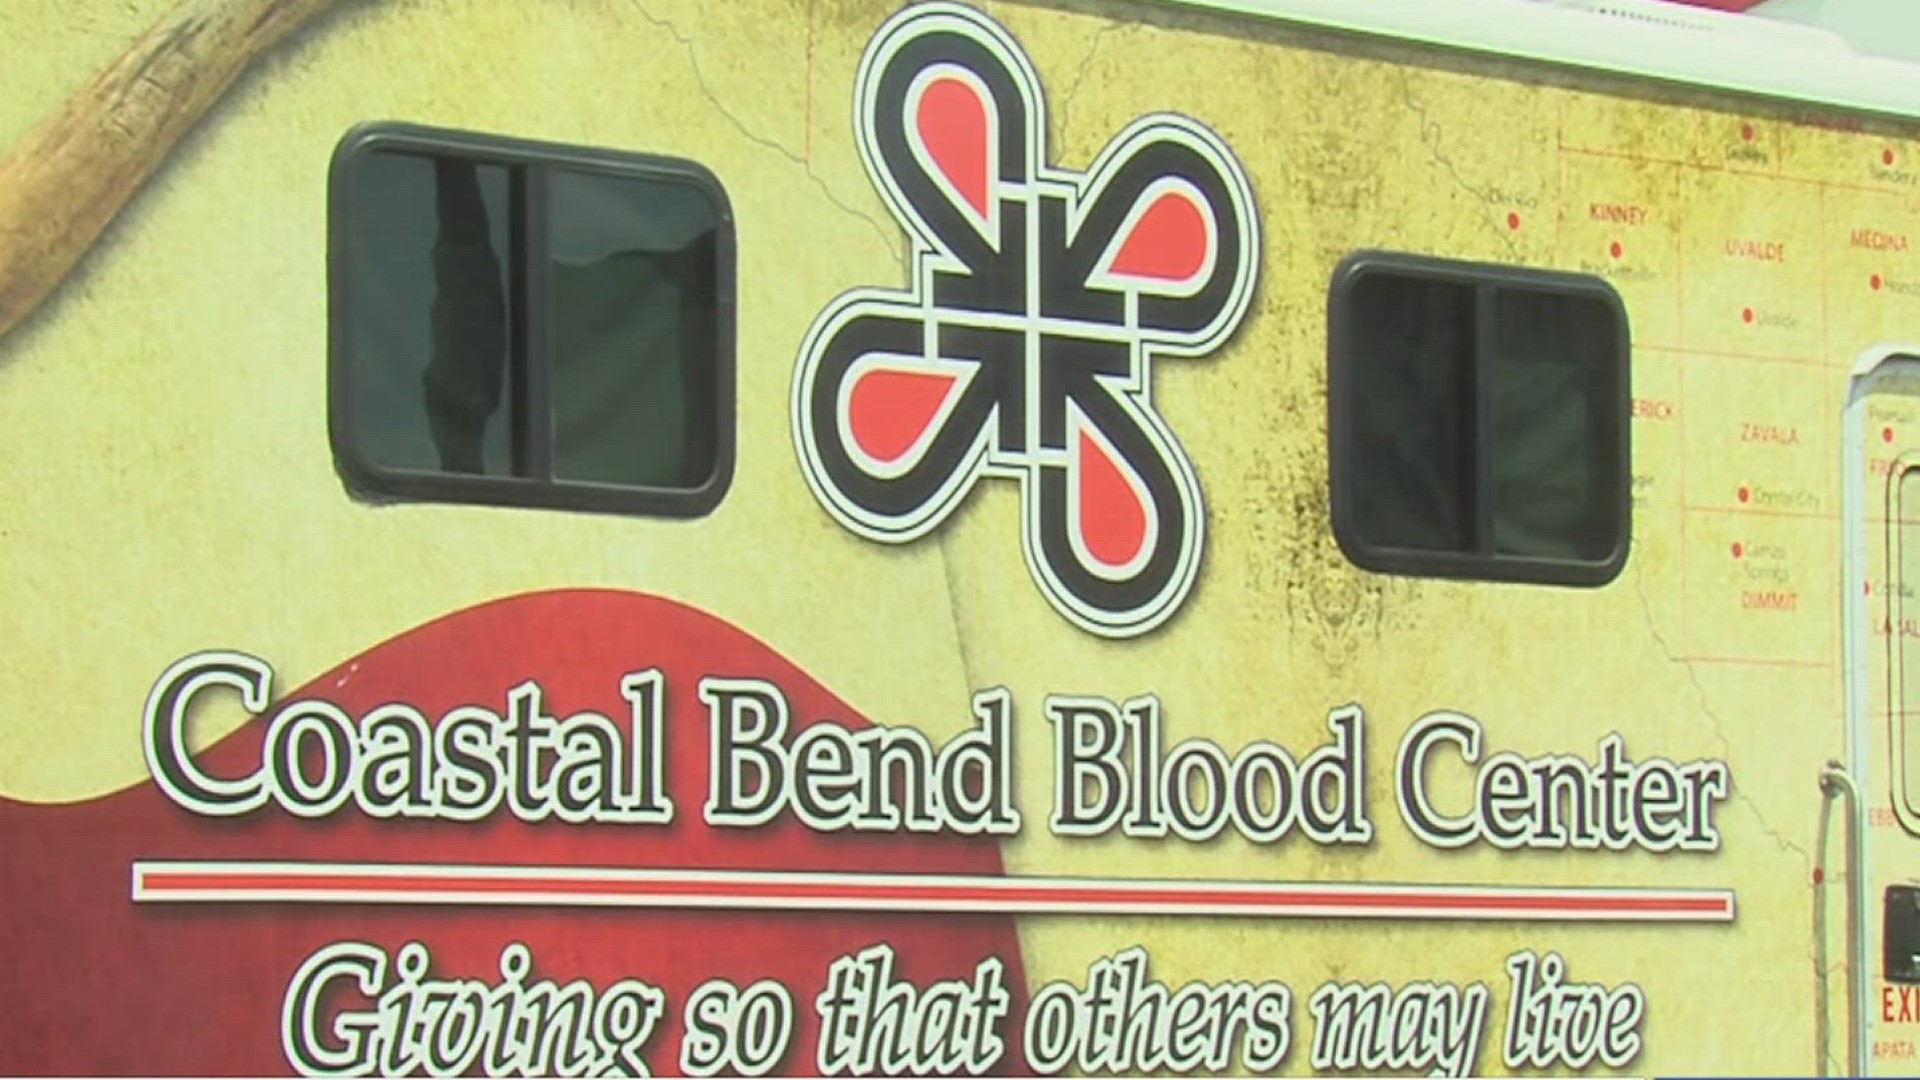 The blood center runs low on Type O blood donations during the summer months, prompting the drives.